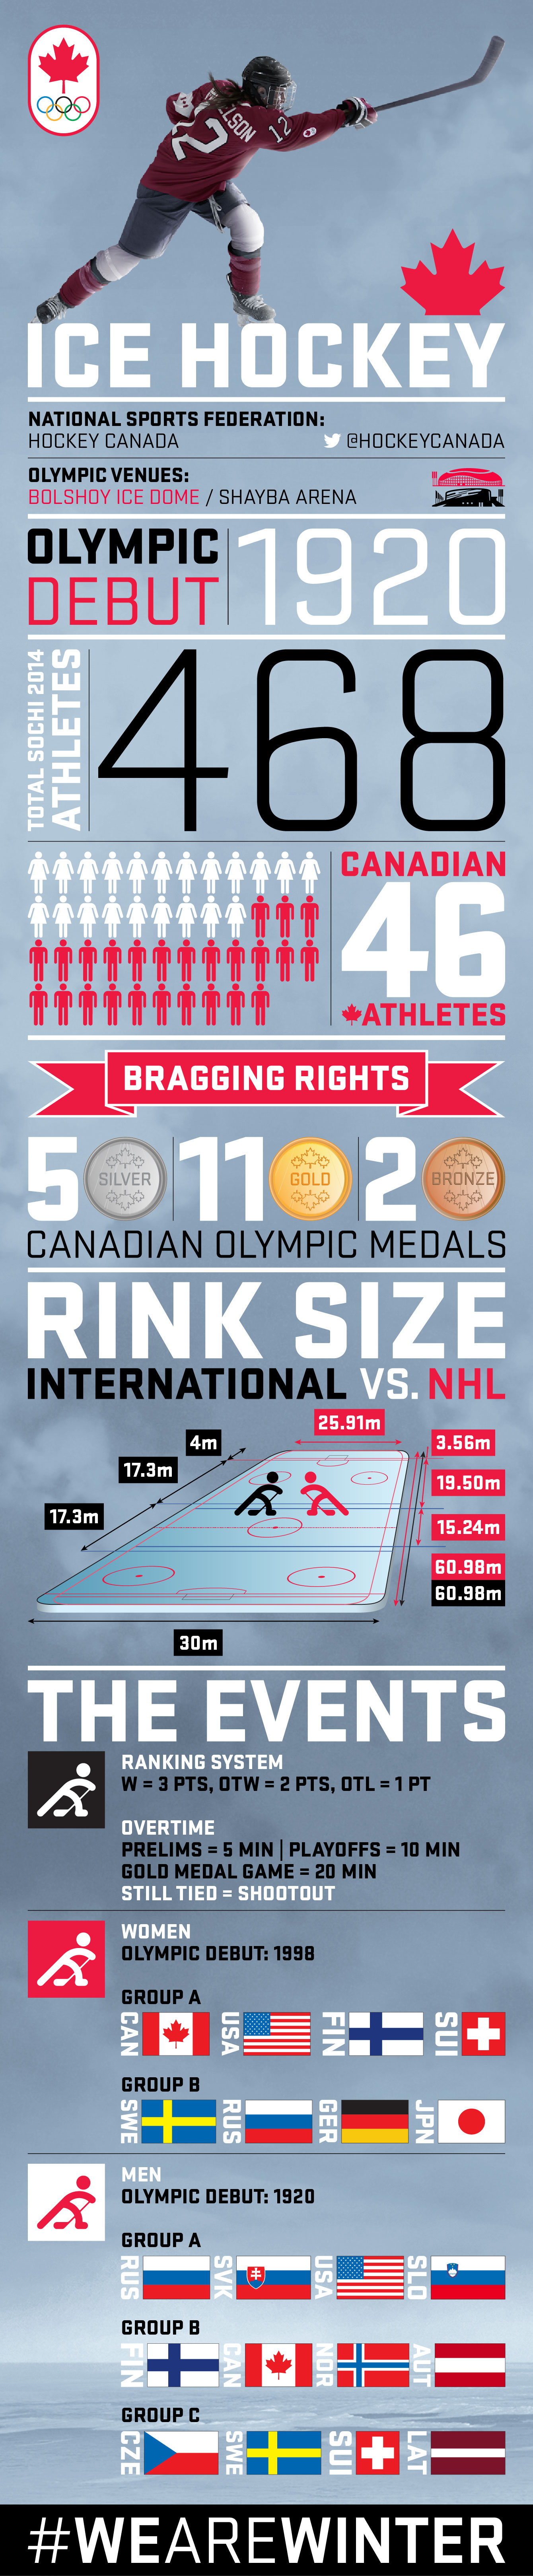 Your guide to Olympic Ice Hockey [INFOGRAPHIC] Team Canada Official